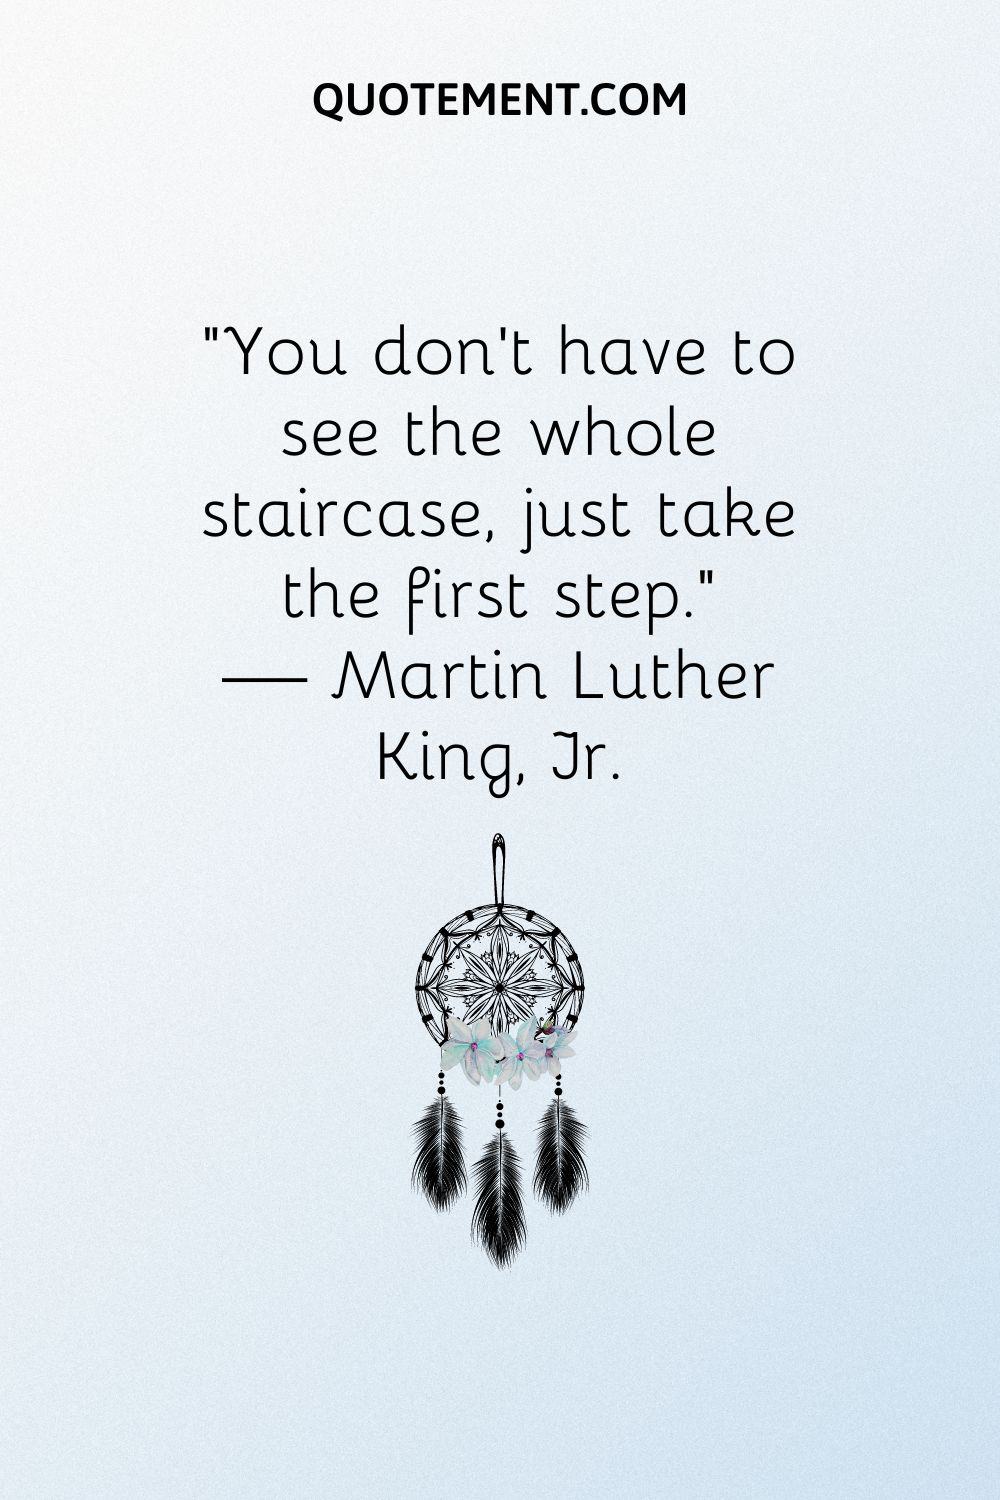 “You don’t have to see the whole staircase, just take the first step.” — Martin Luther King, Jr.